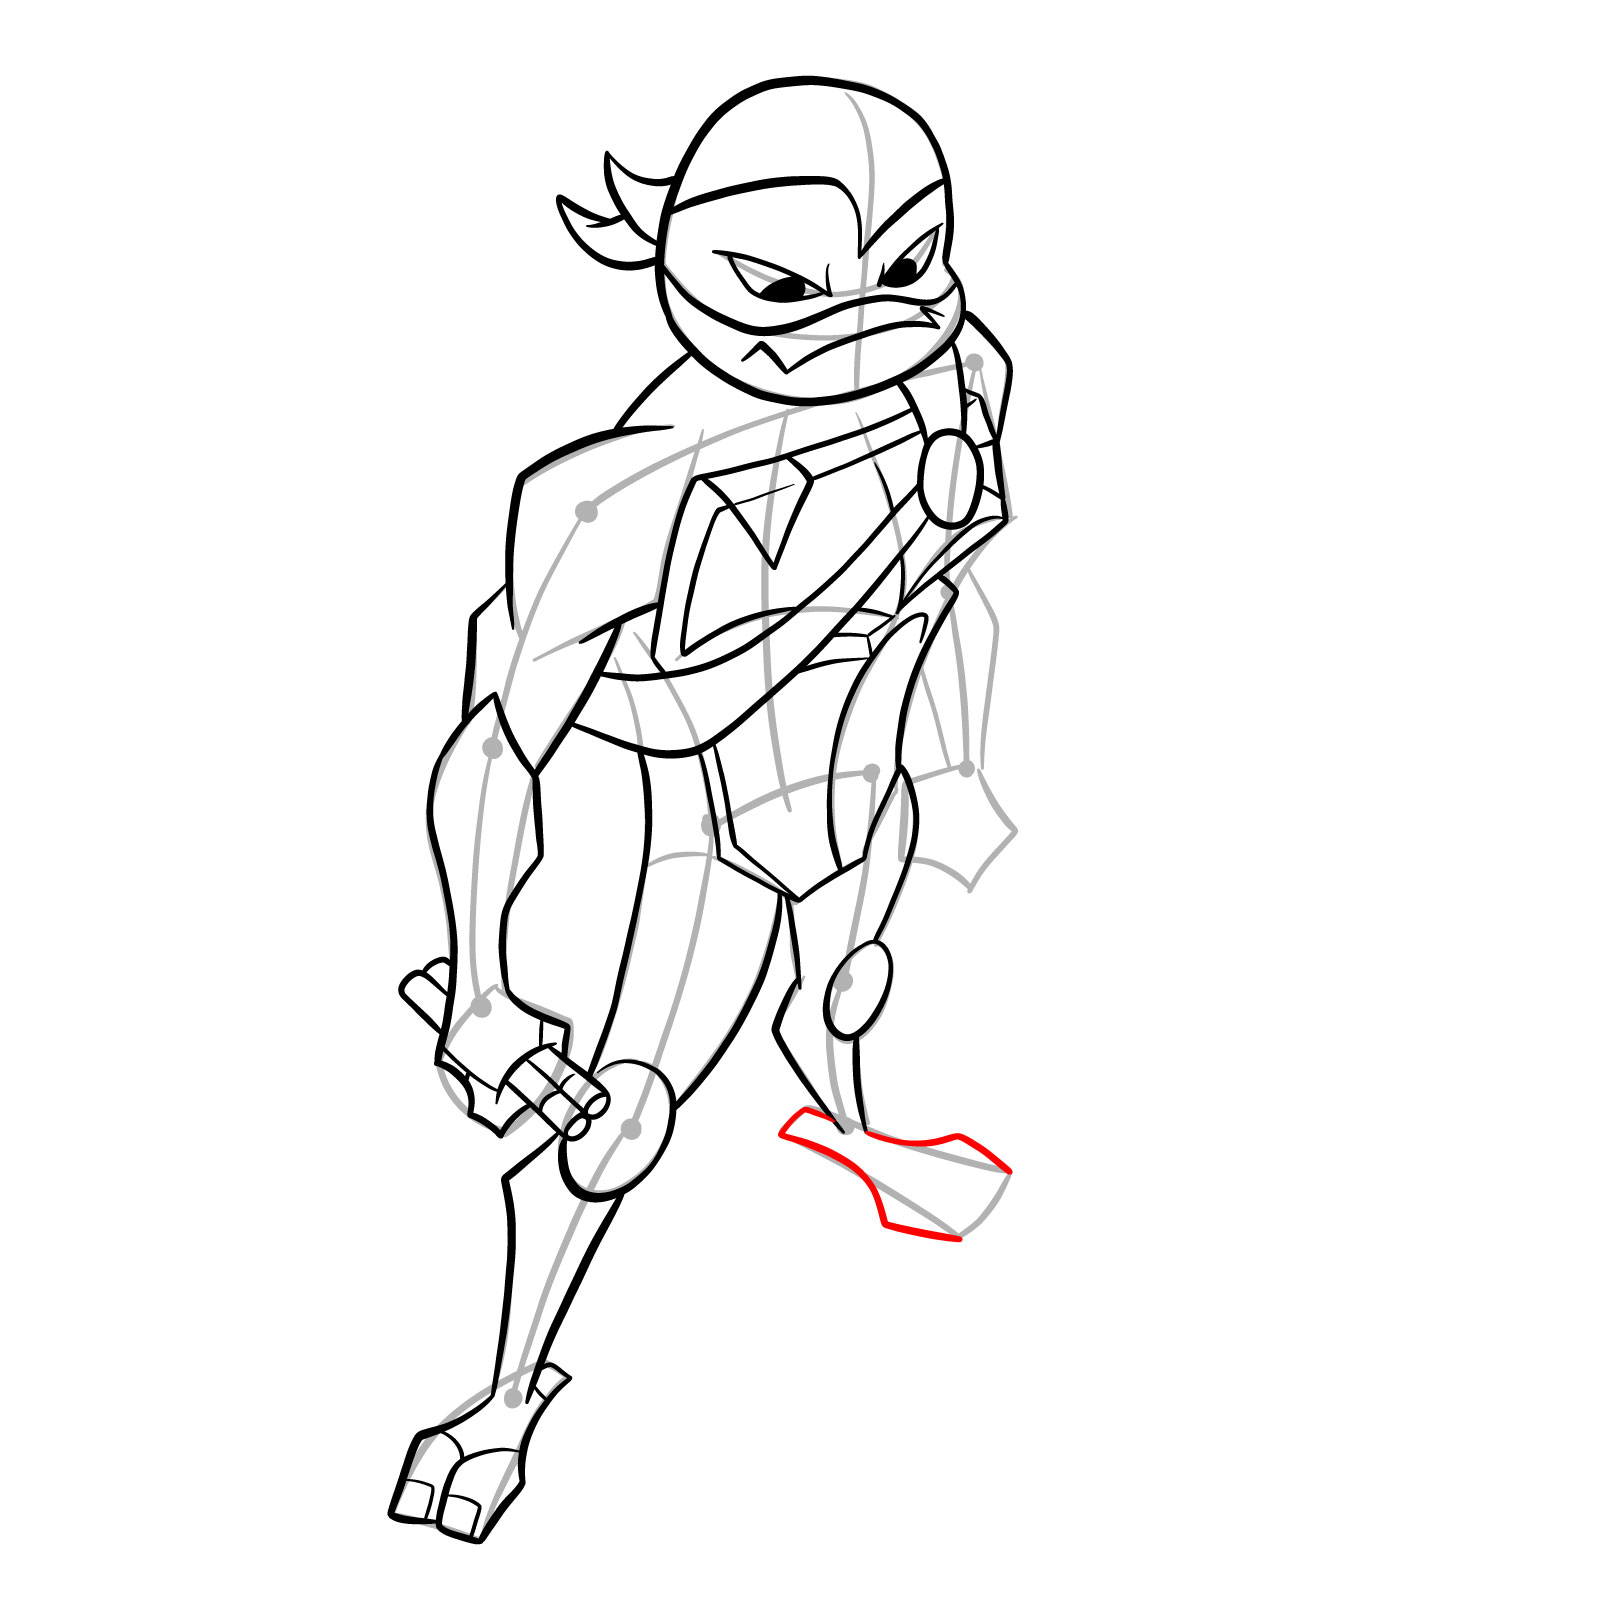 How to draw Mikey in Hamato Ninpō state - step 28